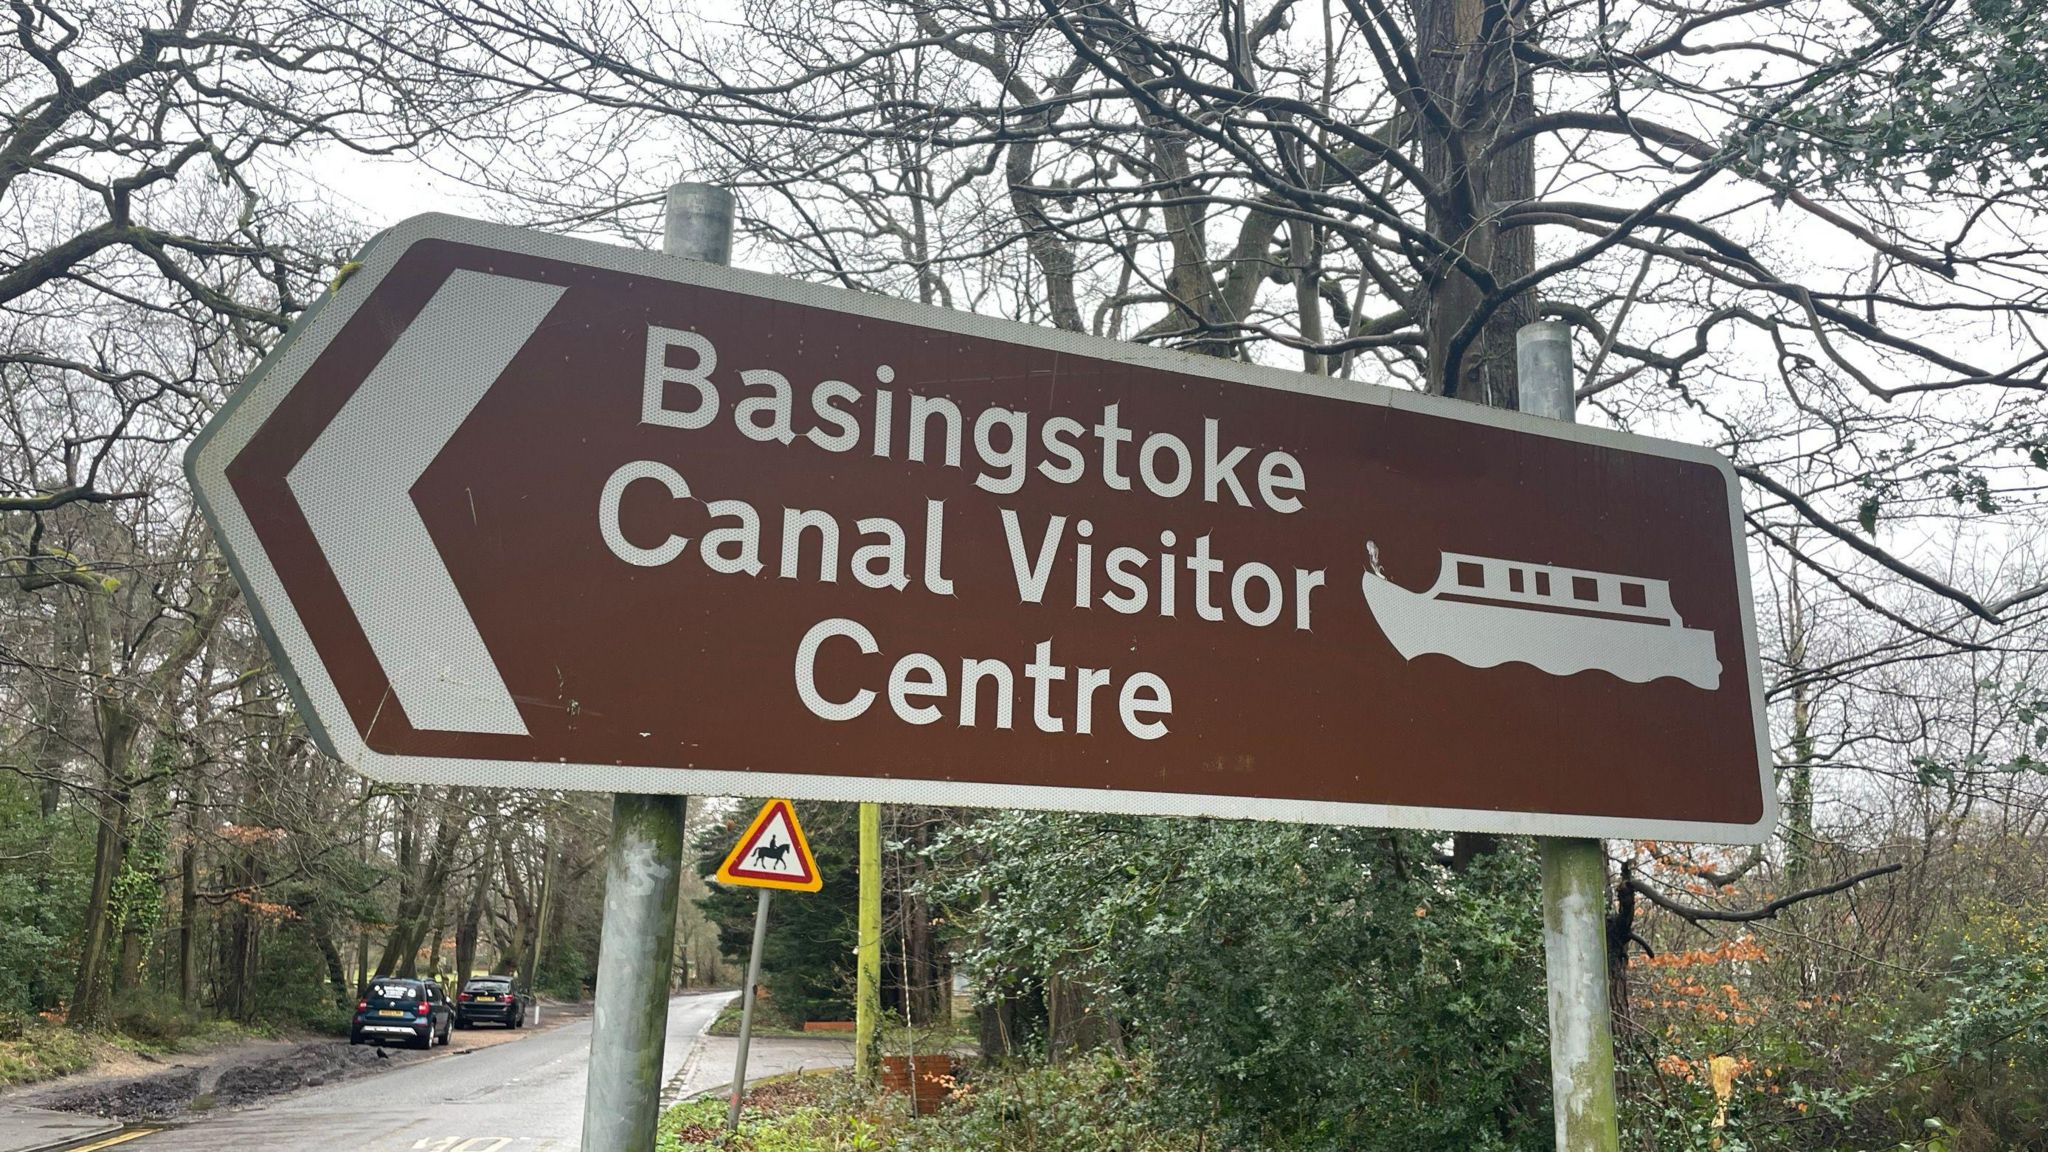 Sign points to Basingstoke Canal Visitor Centre